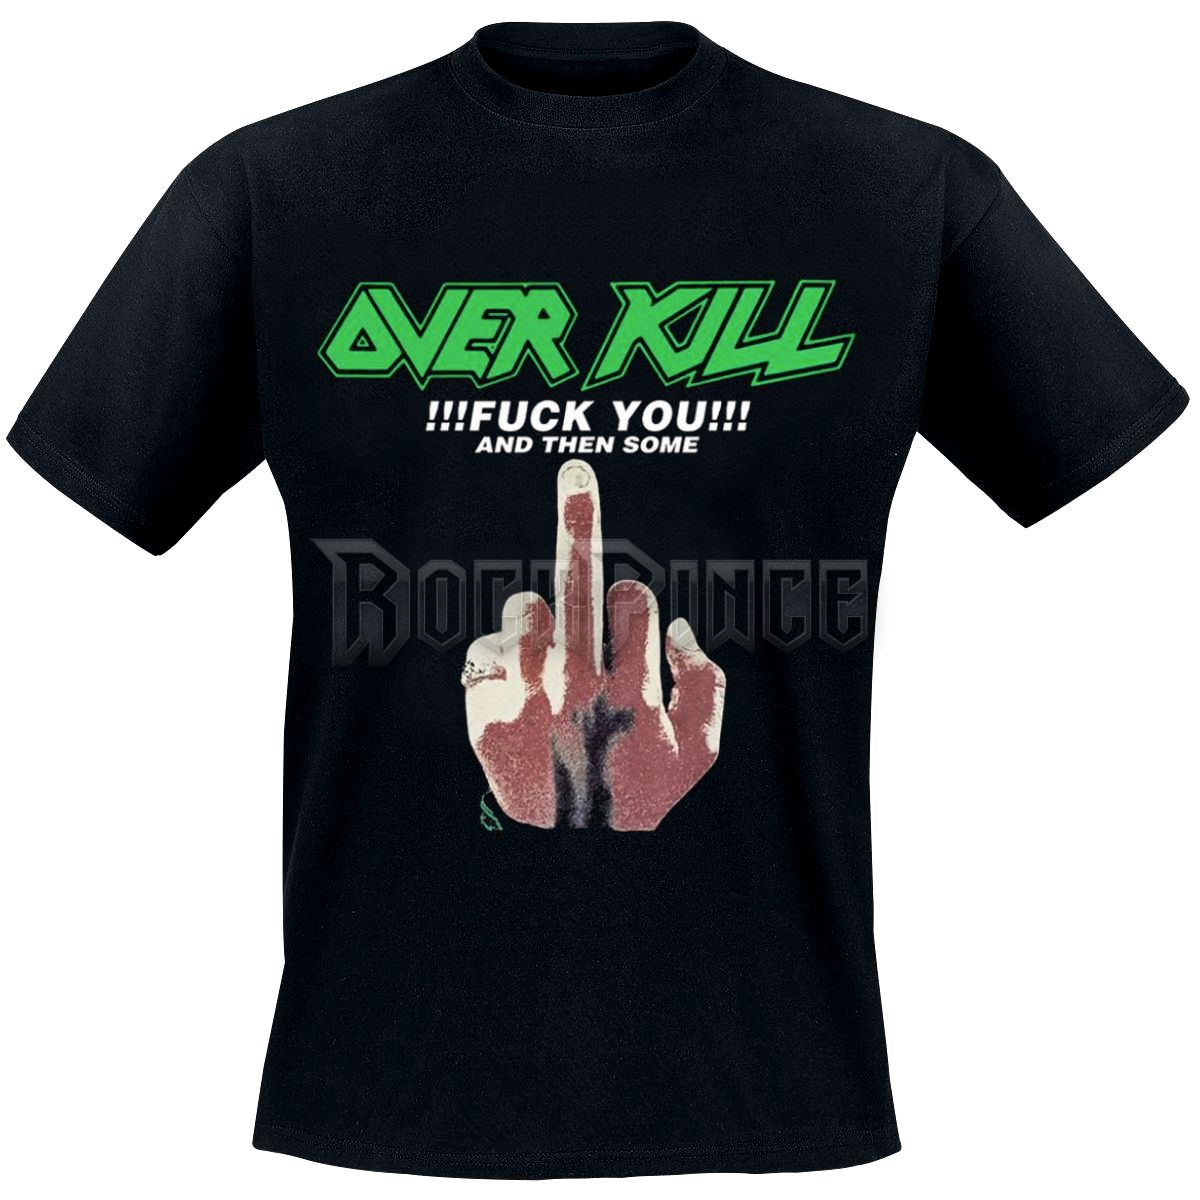 Overkill - !!!Fuck You!!! and Then Some - UNISEX PÓLÓ